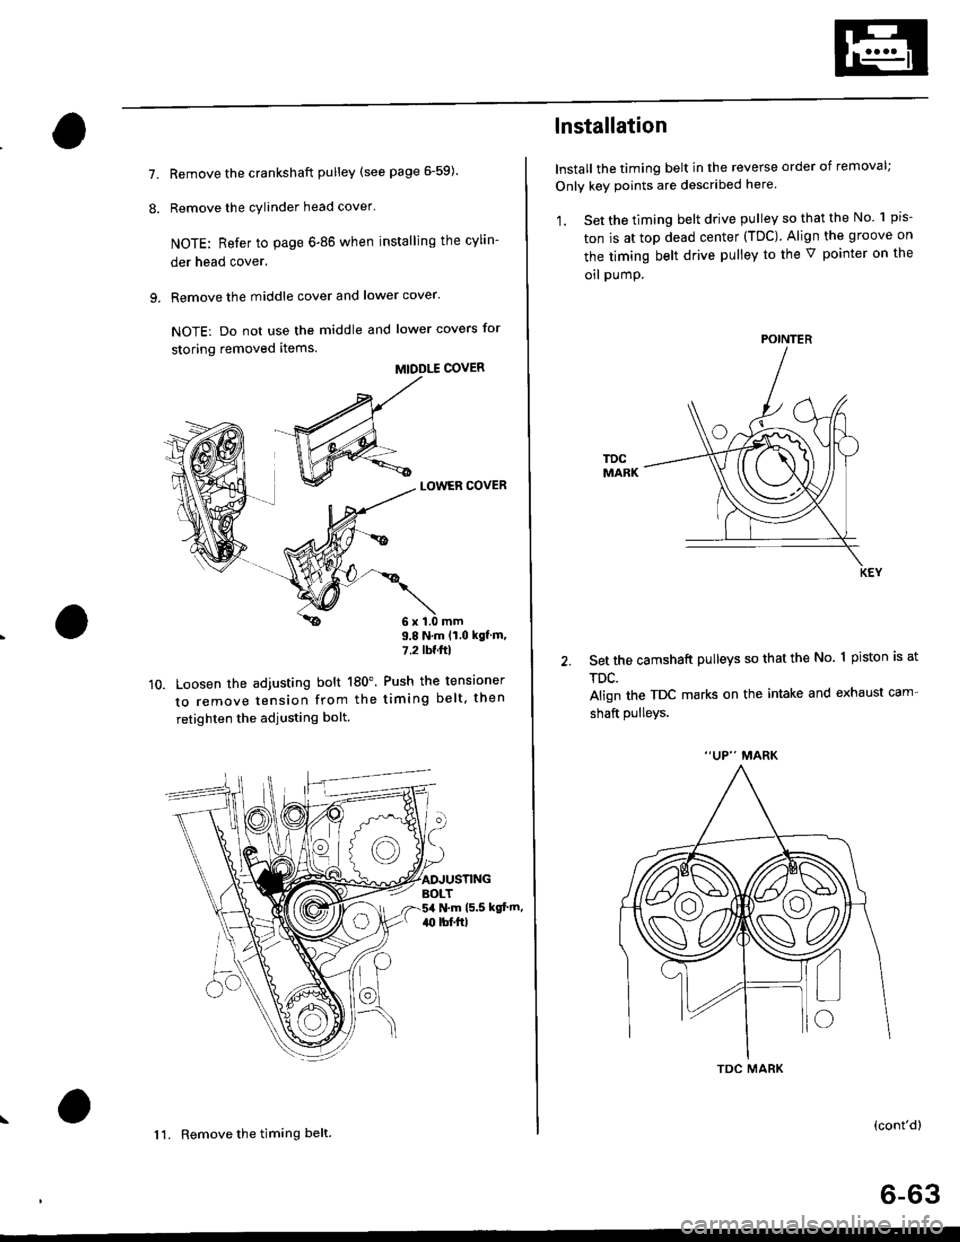 HONDA CIVIC 2000 6.G Workshop Manual 7.
8.
Remove the crankshaft pulley (see page 6-59).
Remove the cylinder head cover
NOTE: Refer to page 6-86 when installing the cylin-
der head cover.
Remove the middle cover and lower cover.
NOTE: D